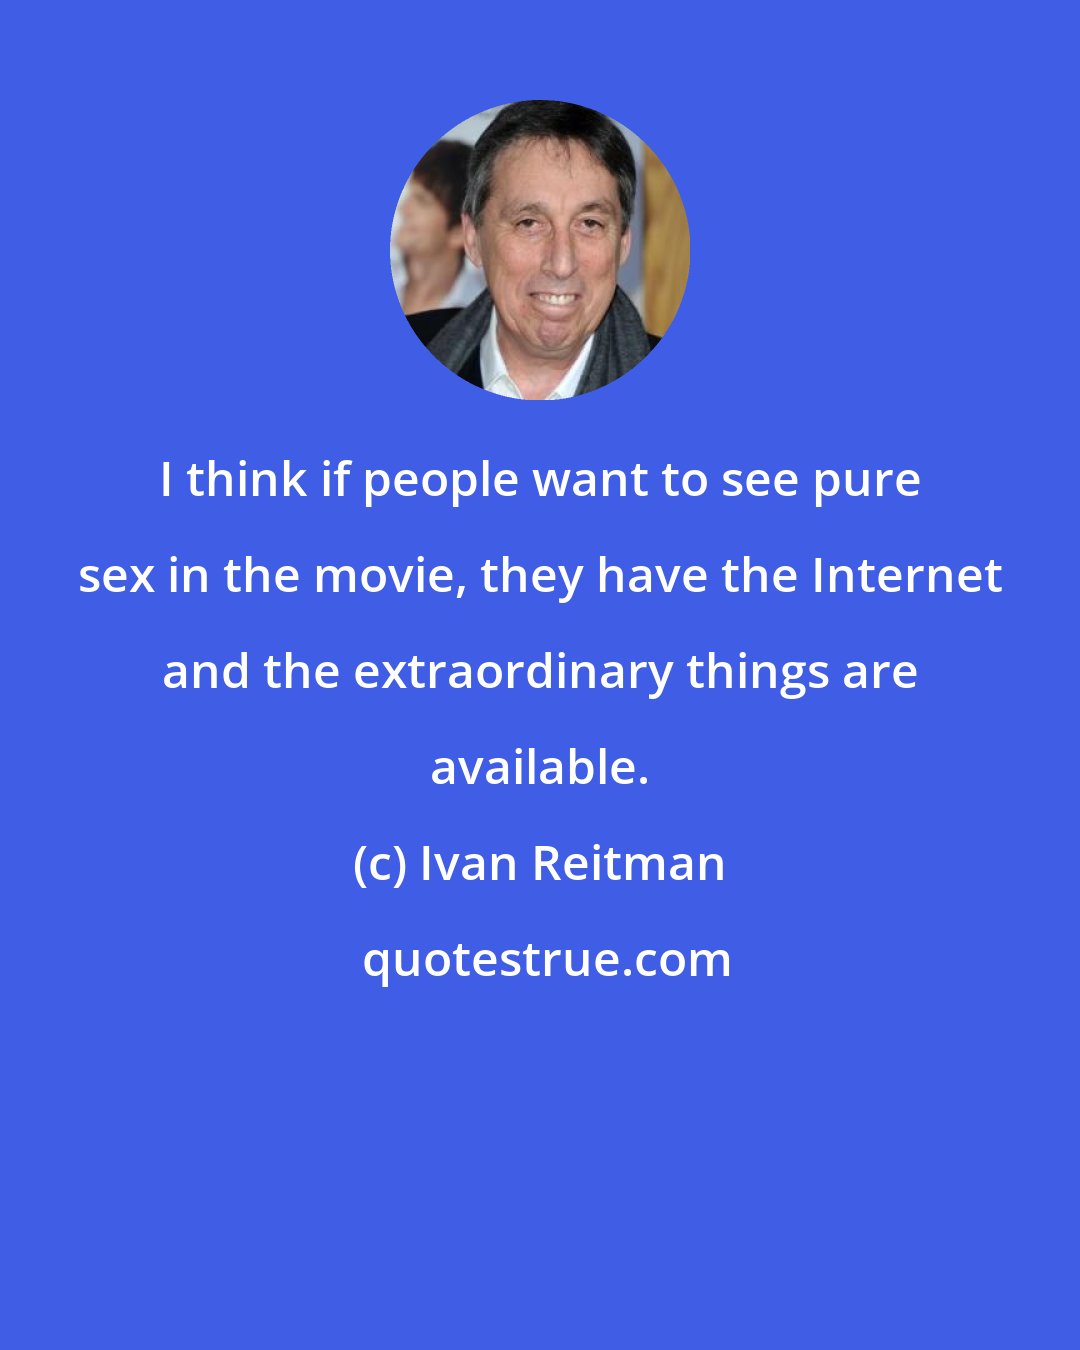 Ivan Reitman: I think if people want to see pure sex in the movie, they have the Internet and the extraordinary things are available.